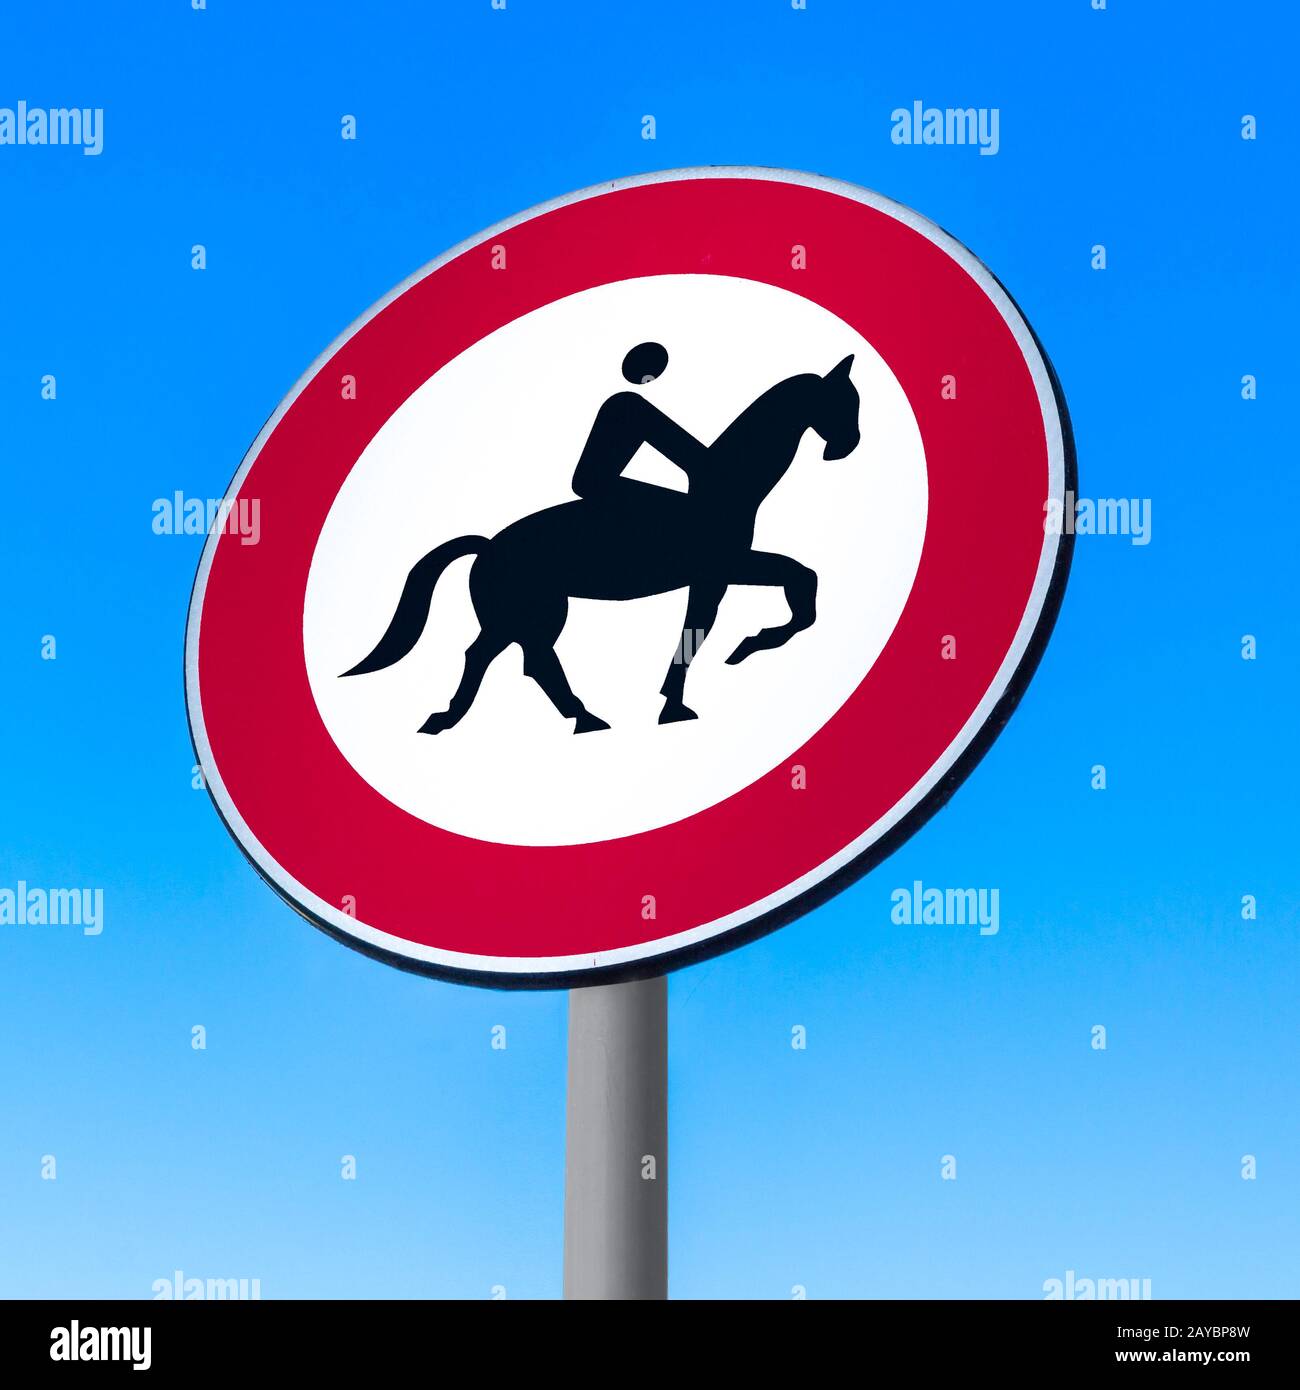 Road sign to prohibit passage with horse Stock Photo